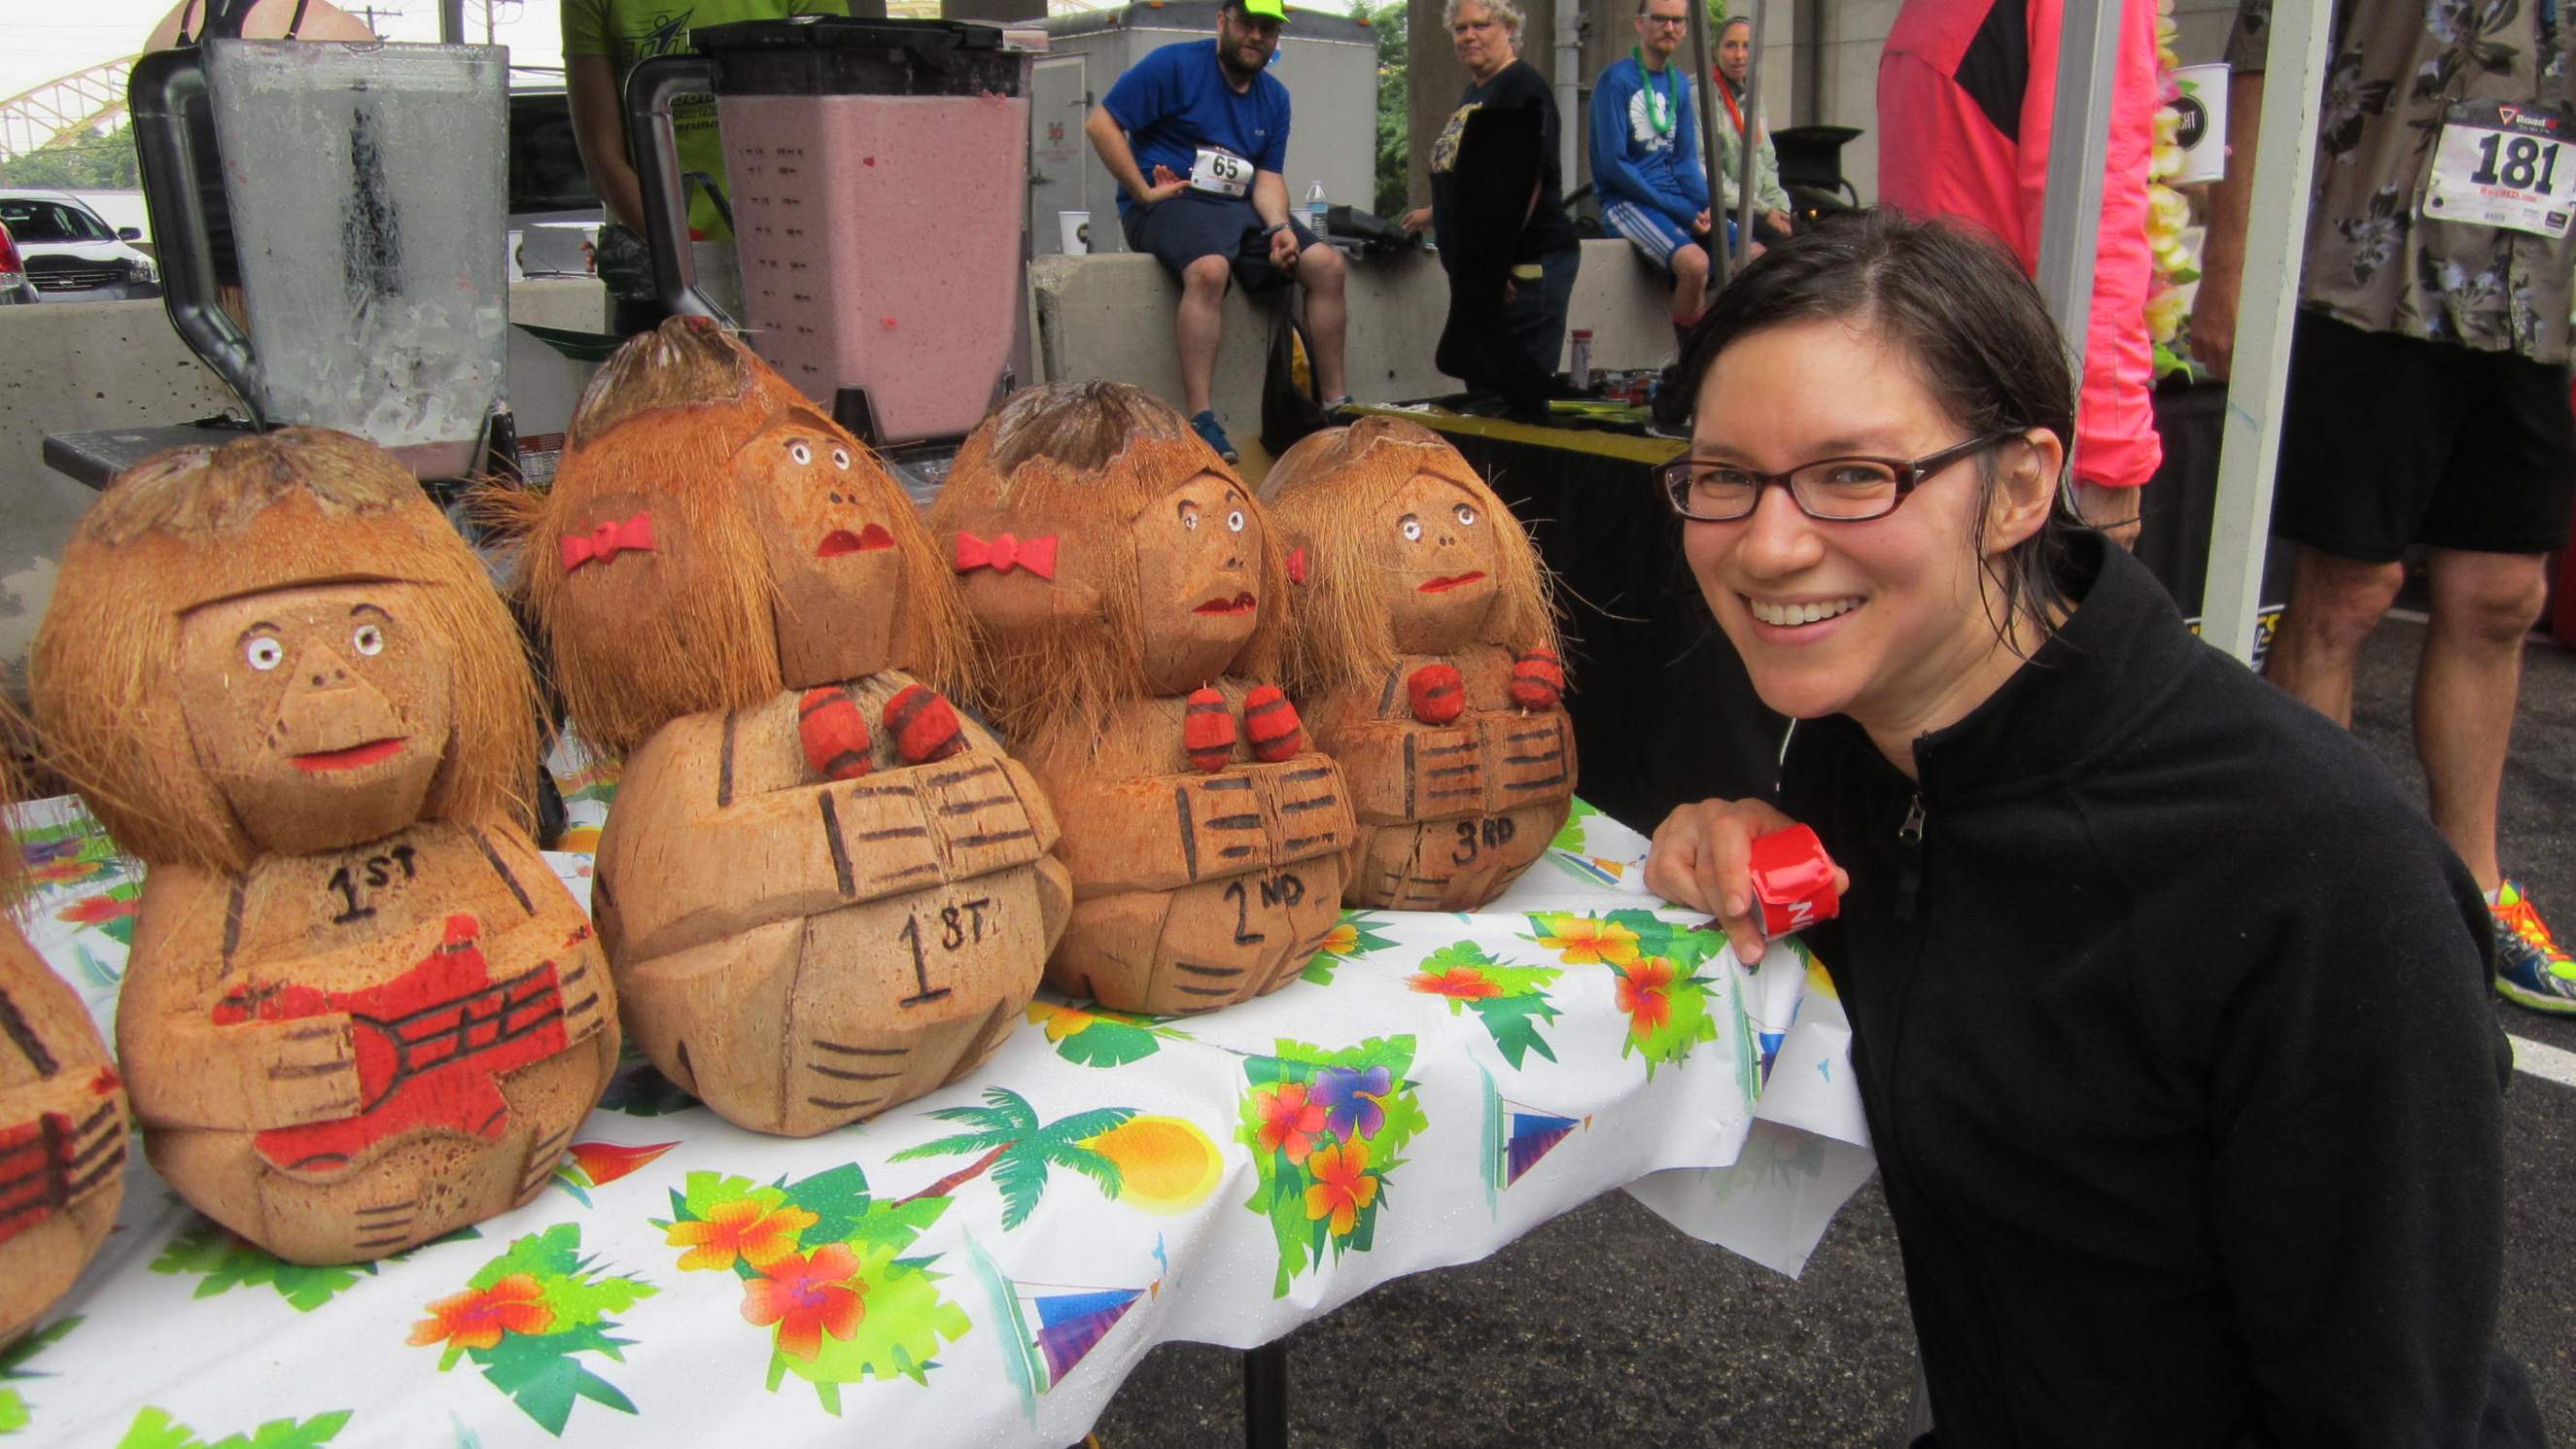 Sarah with the carved coconut awards.